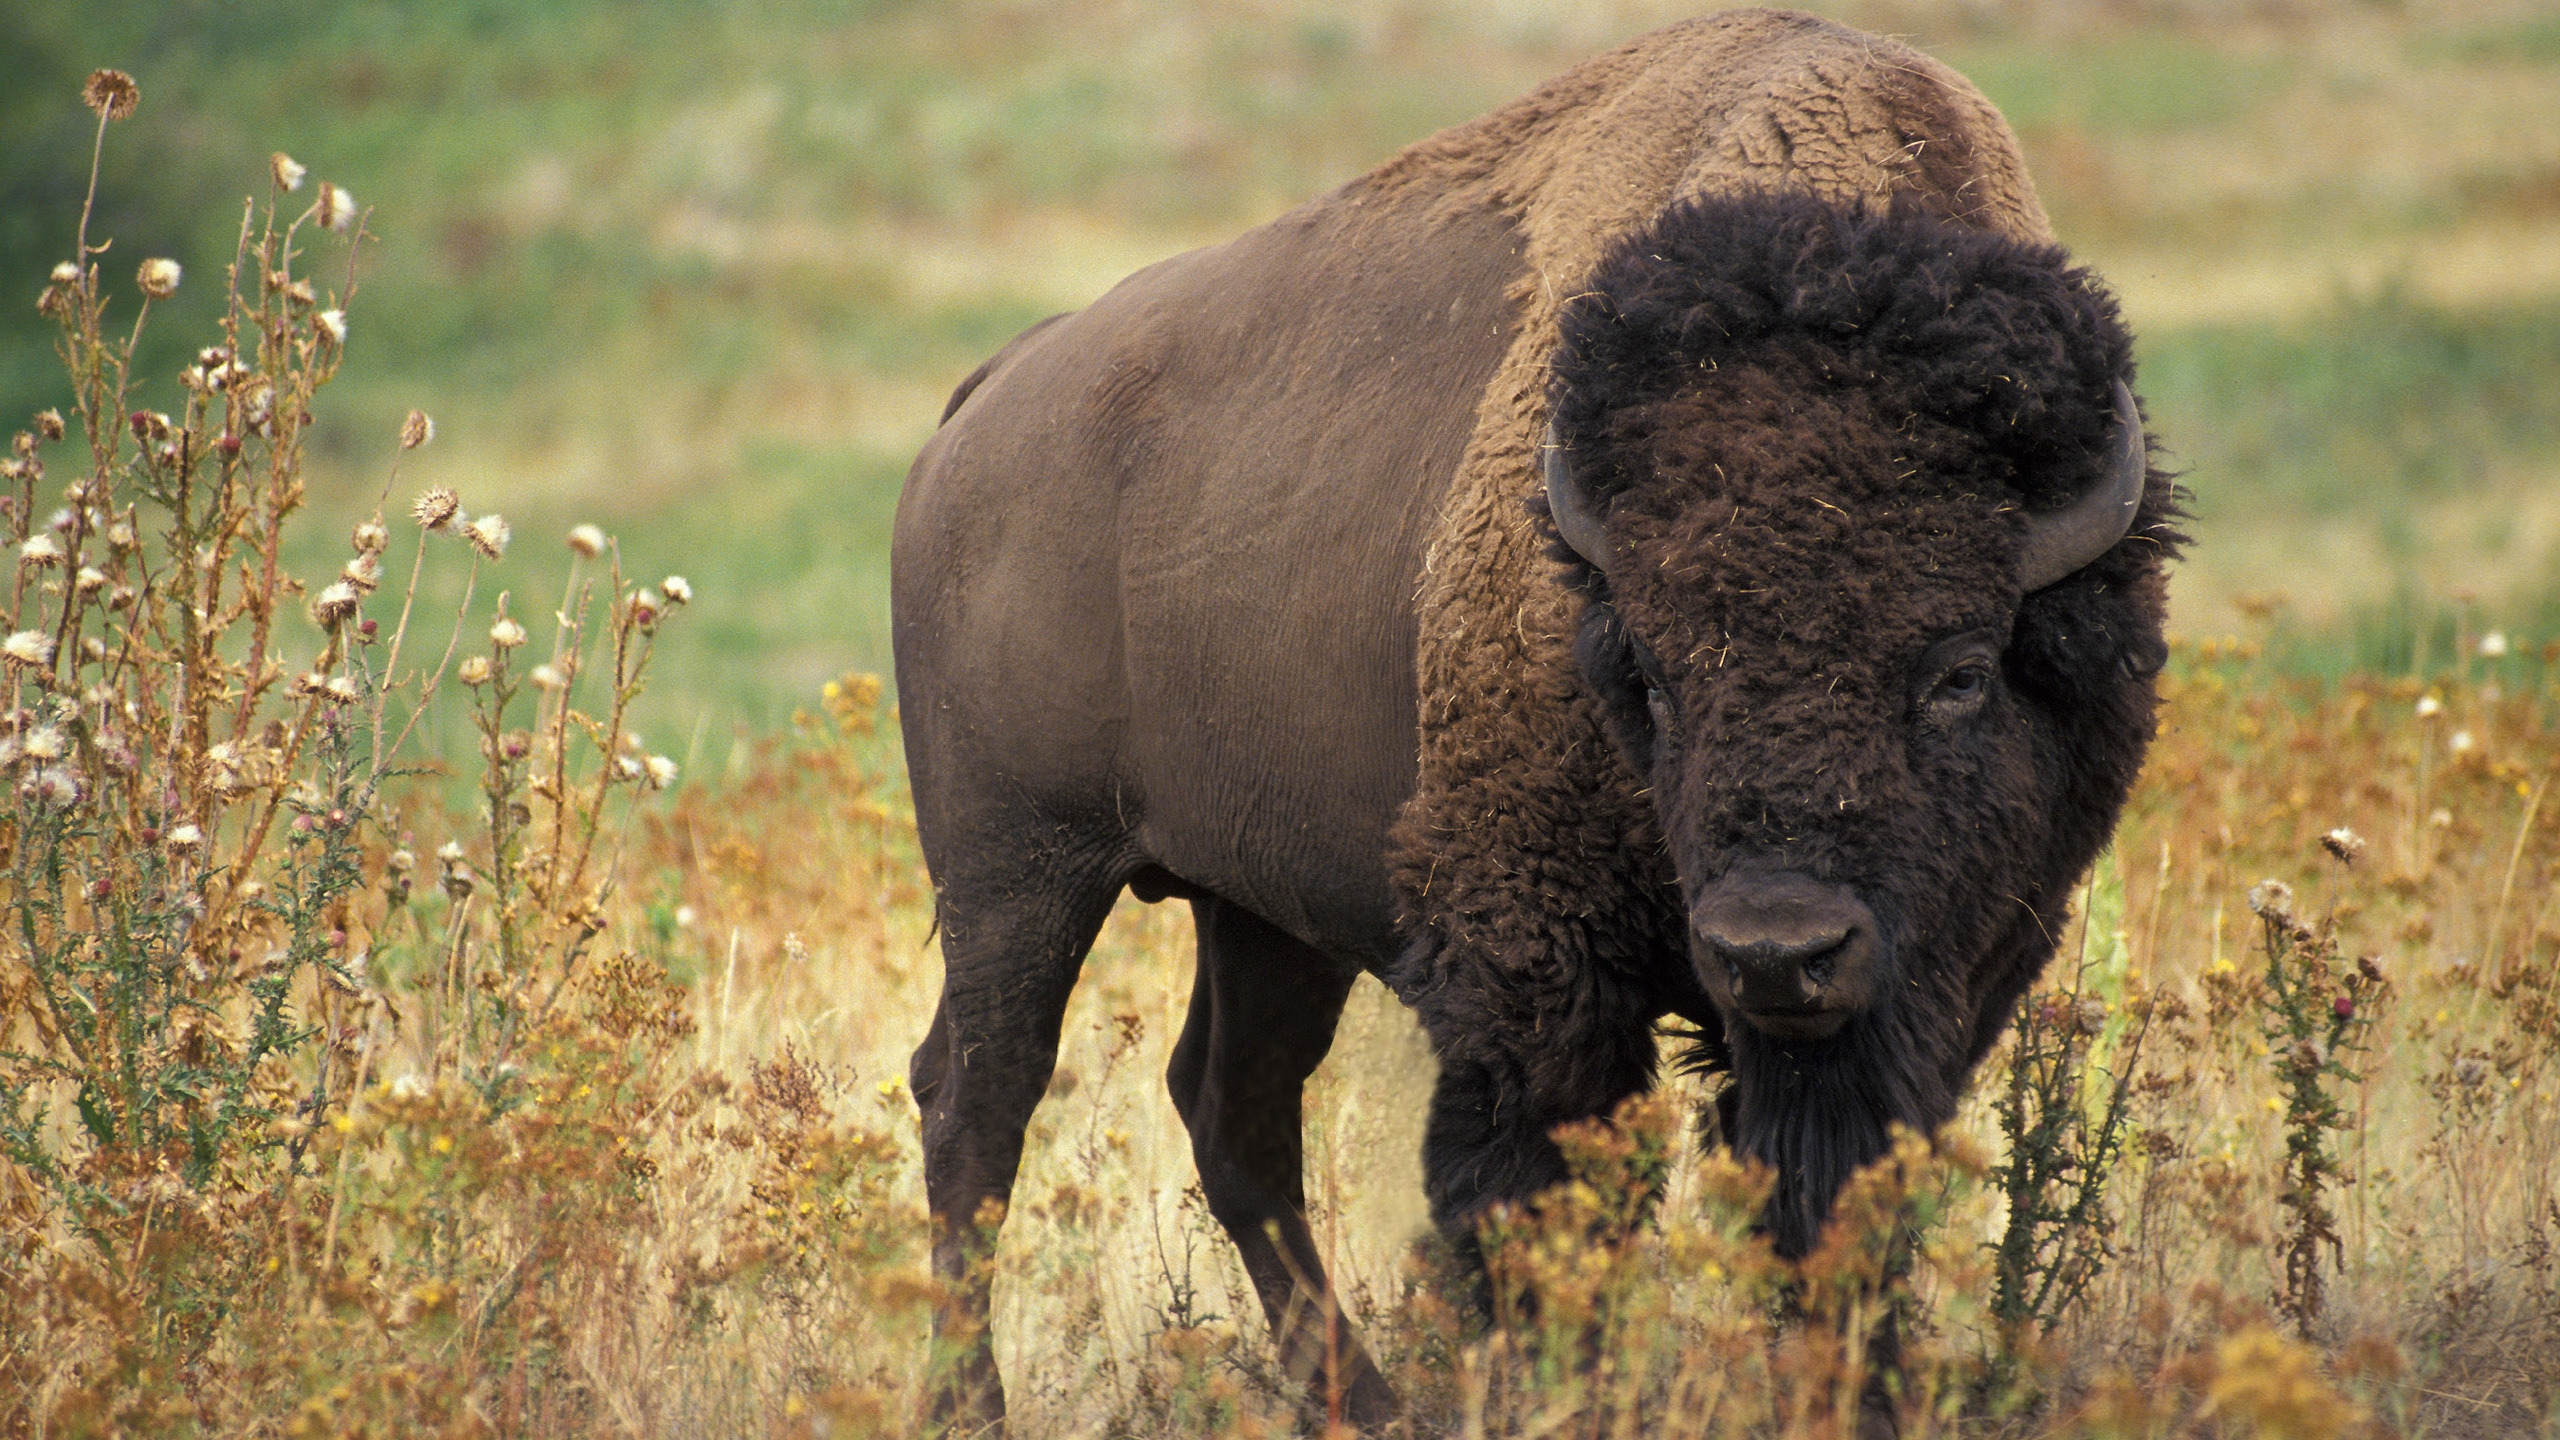 American bison for 2560x1440 HDTV resolution